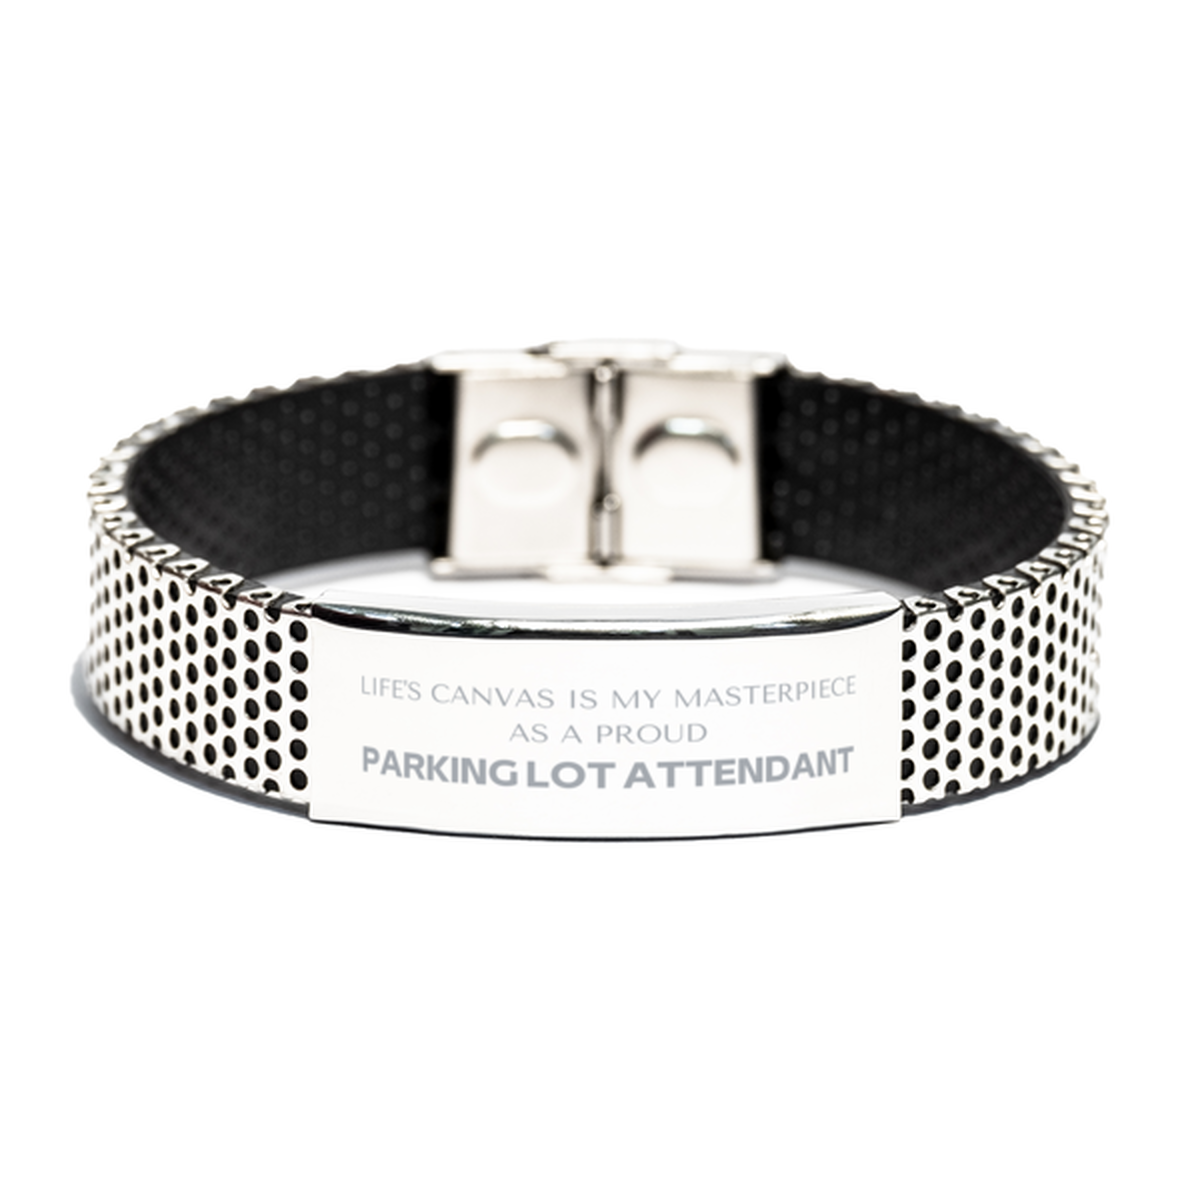 Proud Parking Lot Attendant Gifts, Life's canvas is my masterpiece, Epic Birthday Christmas Unique Stainless Steel Bracelet For Parking Lot Attendant, Coworkers, Men, Women, Friends